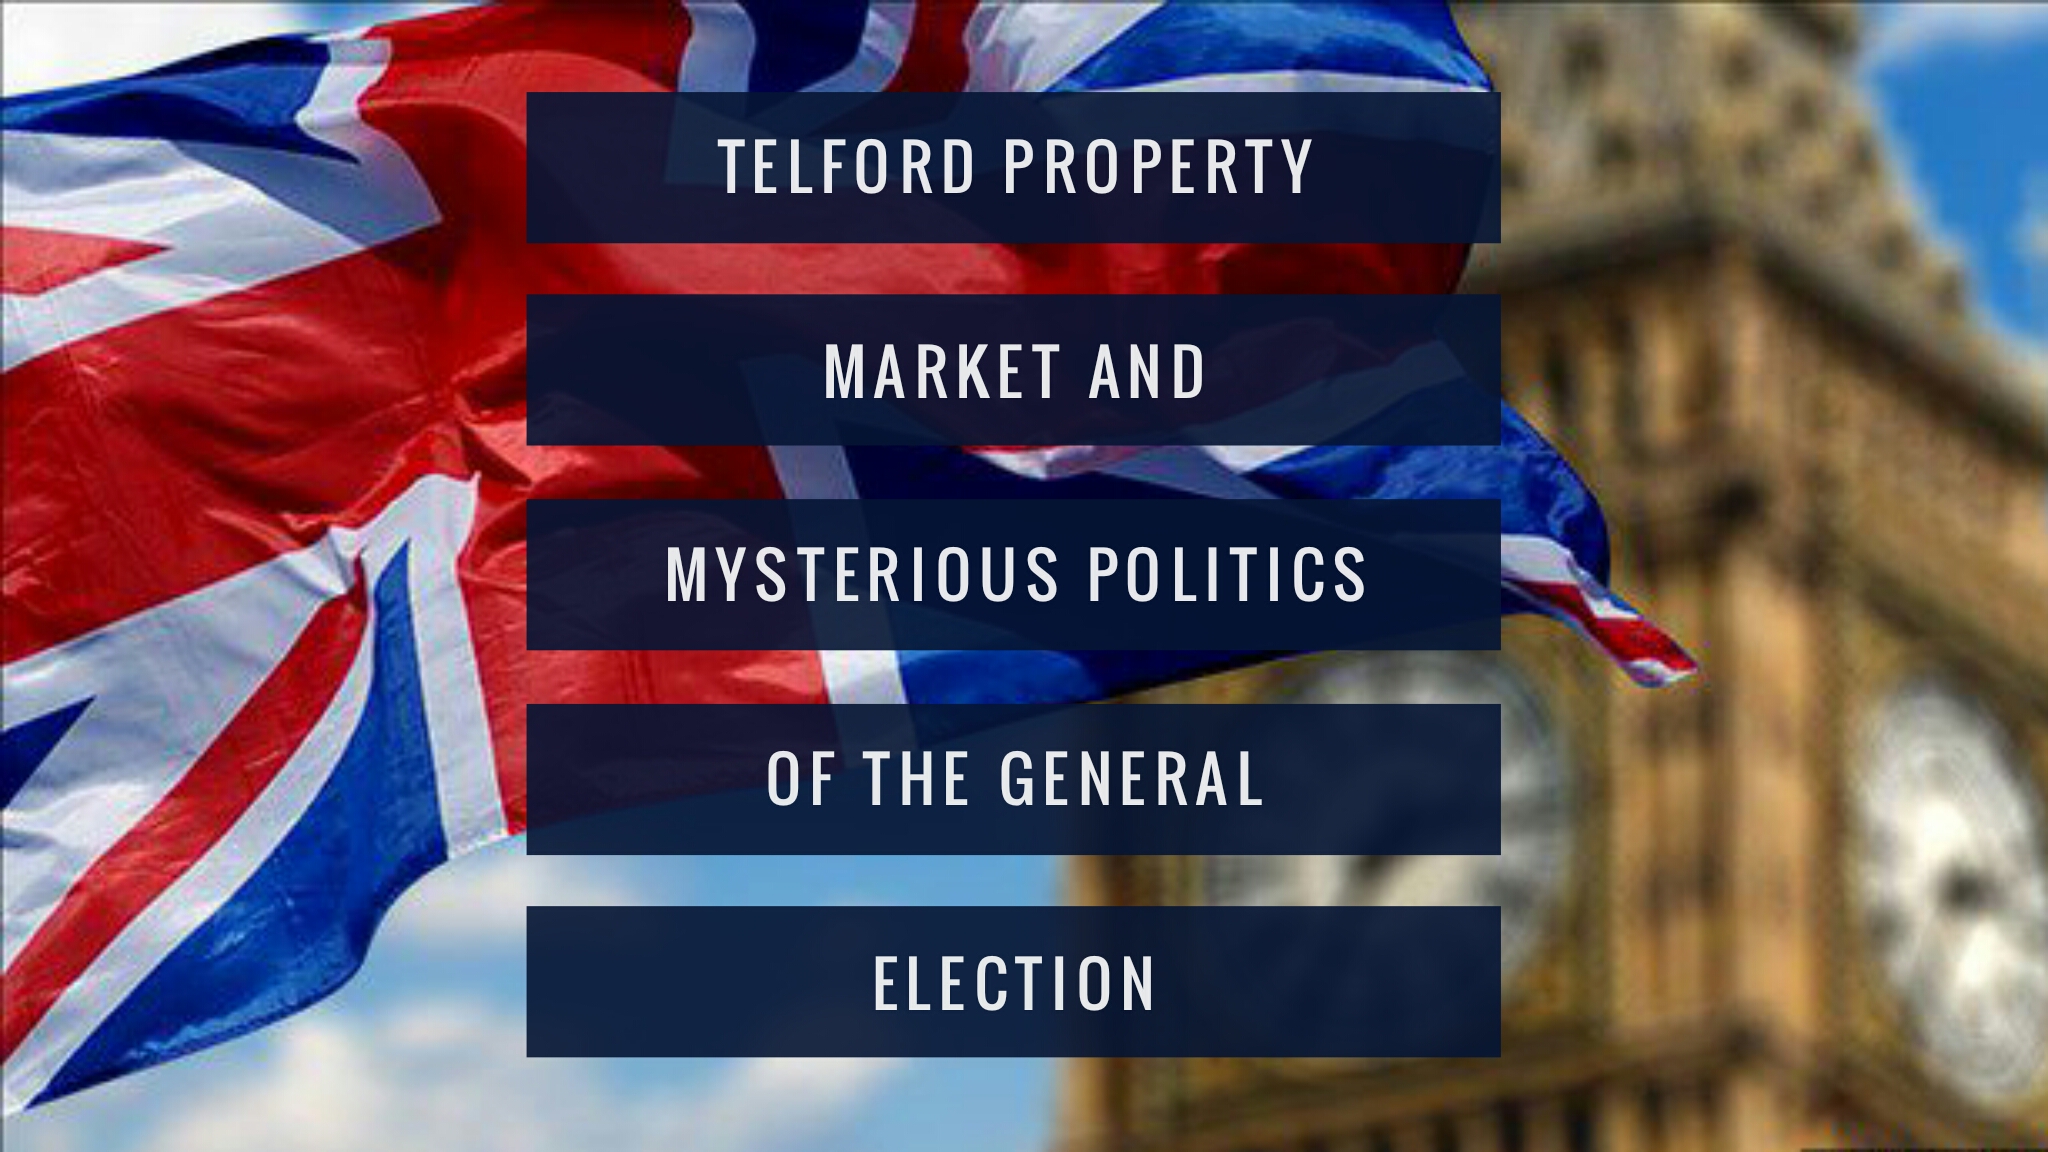 Telford Property Market and Mysterious Politics of the General Election